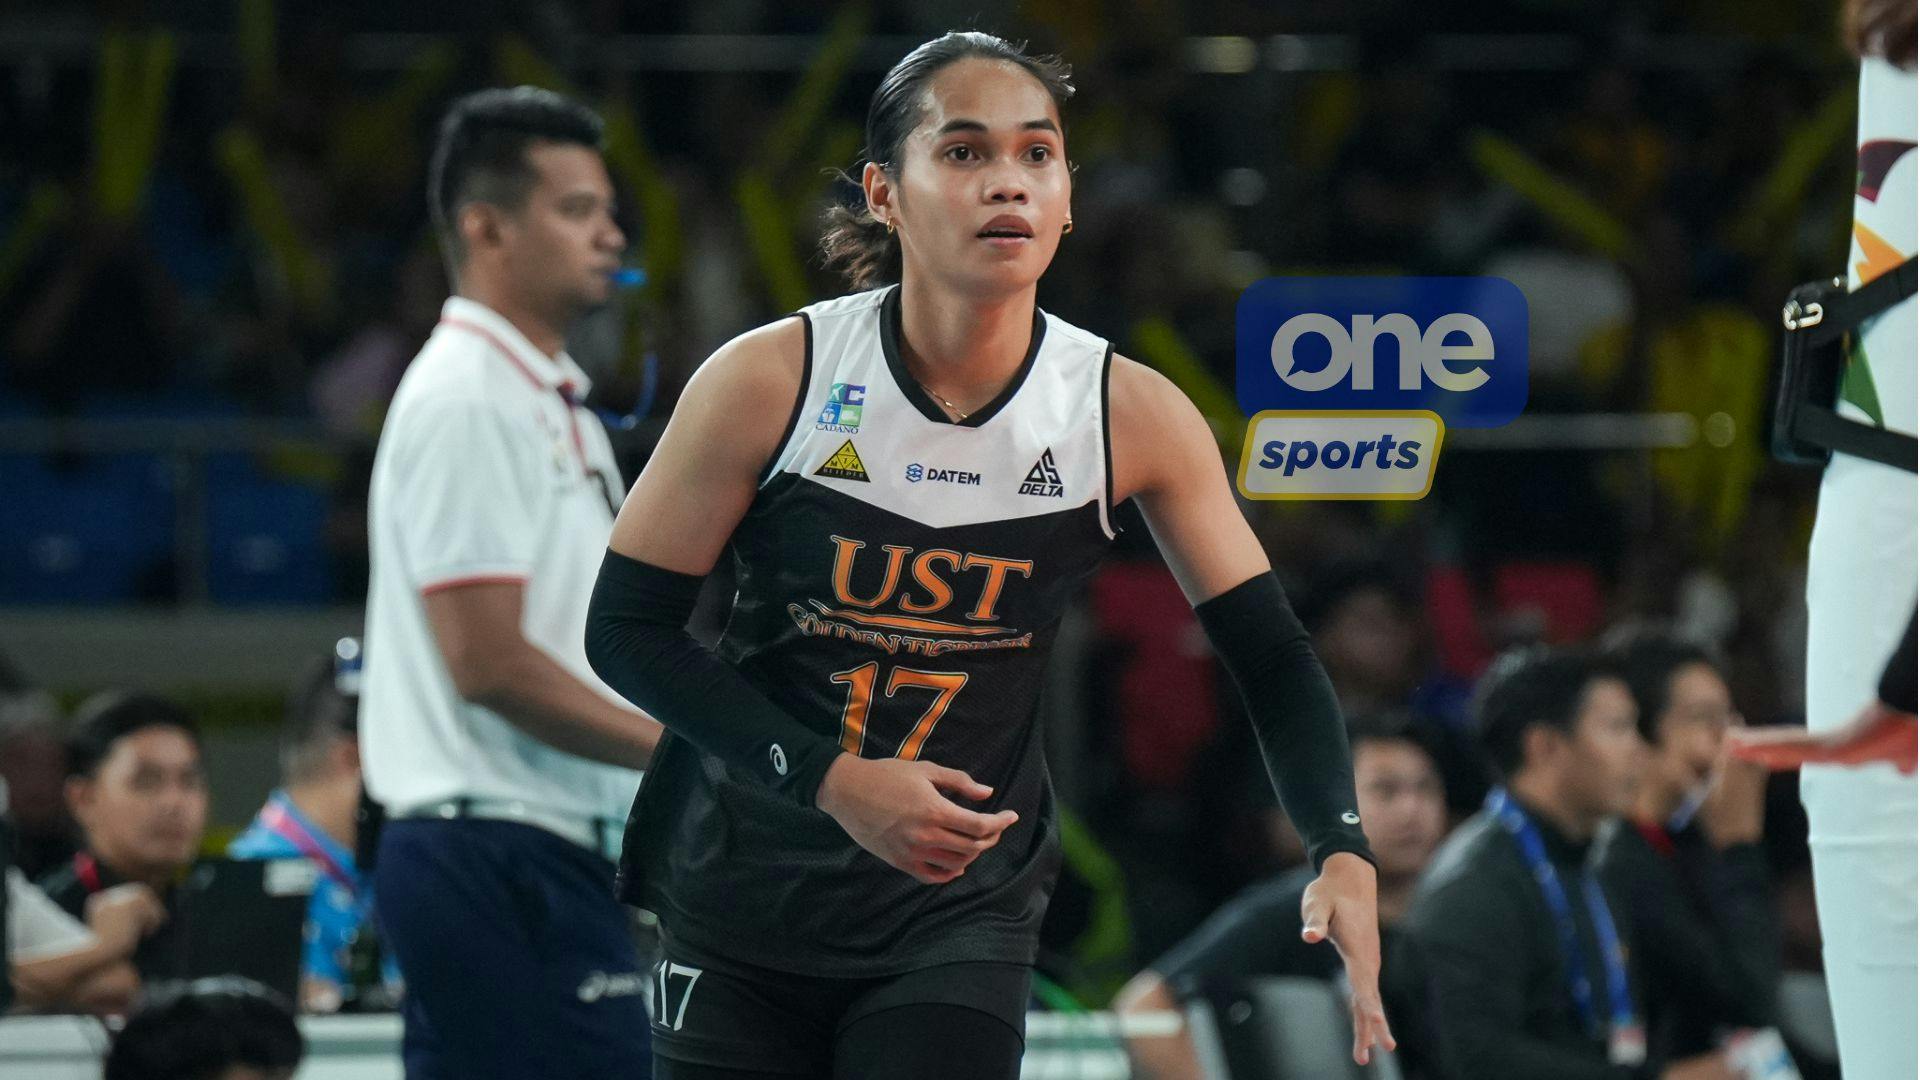 UAAP: Kungfu Reyes explains decision to sit Angge Poyos during crucial stages of UST’s loss to FEU